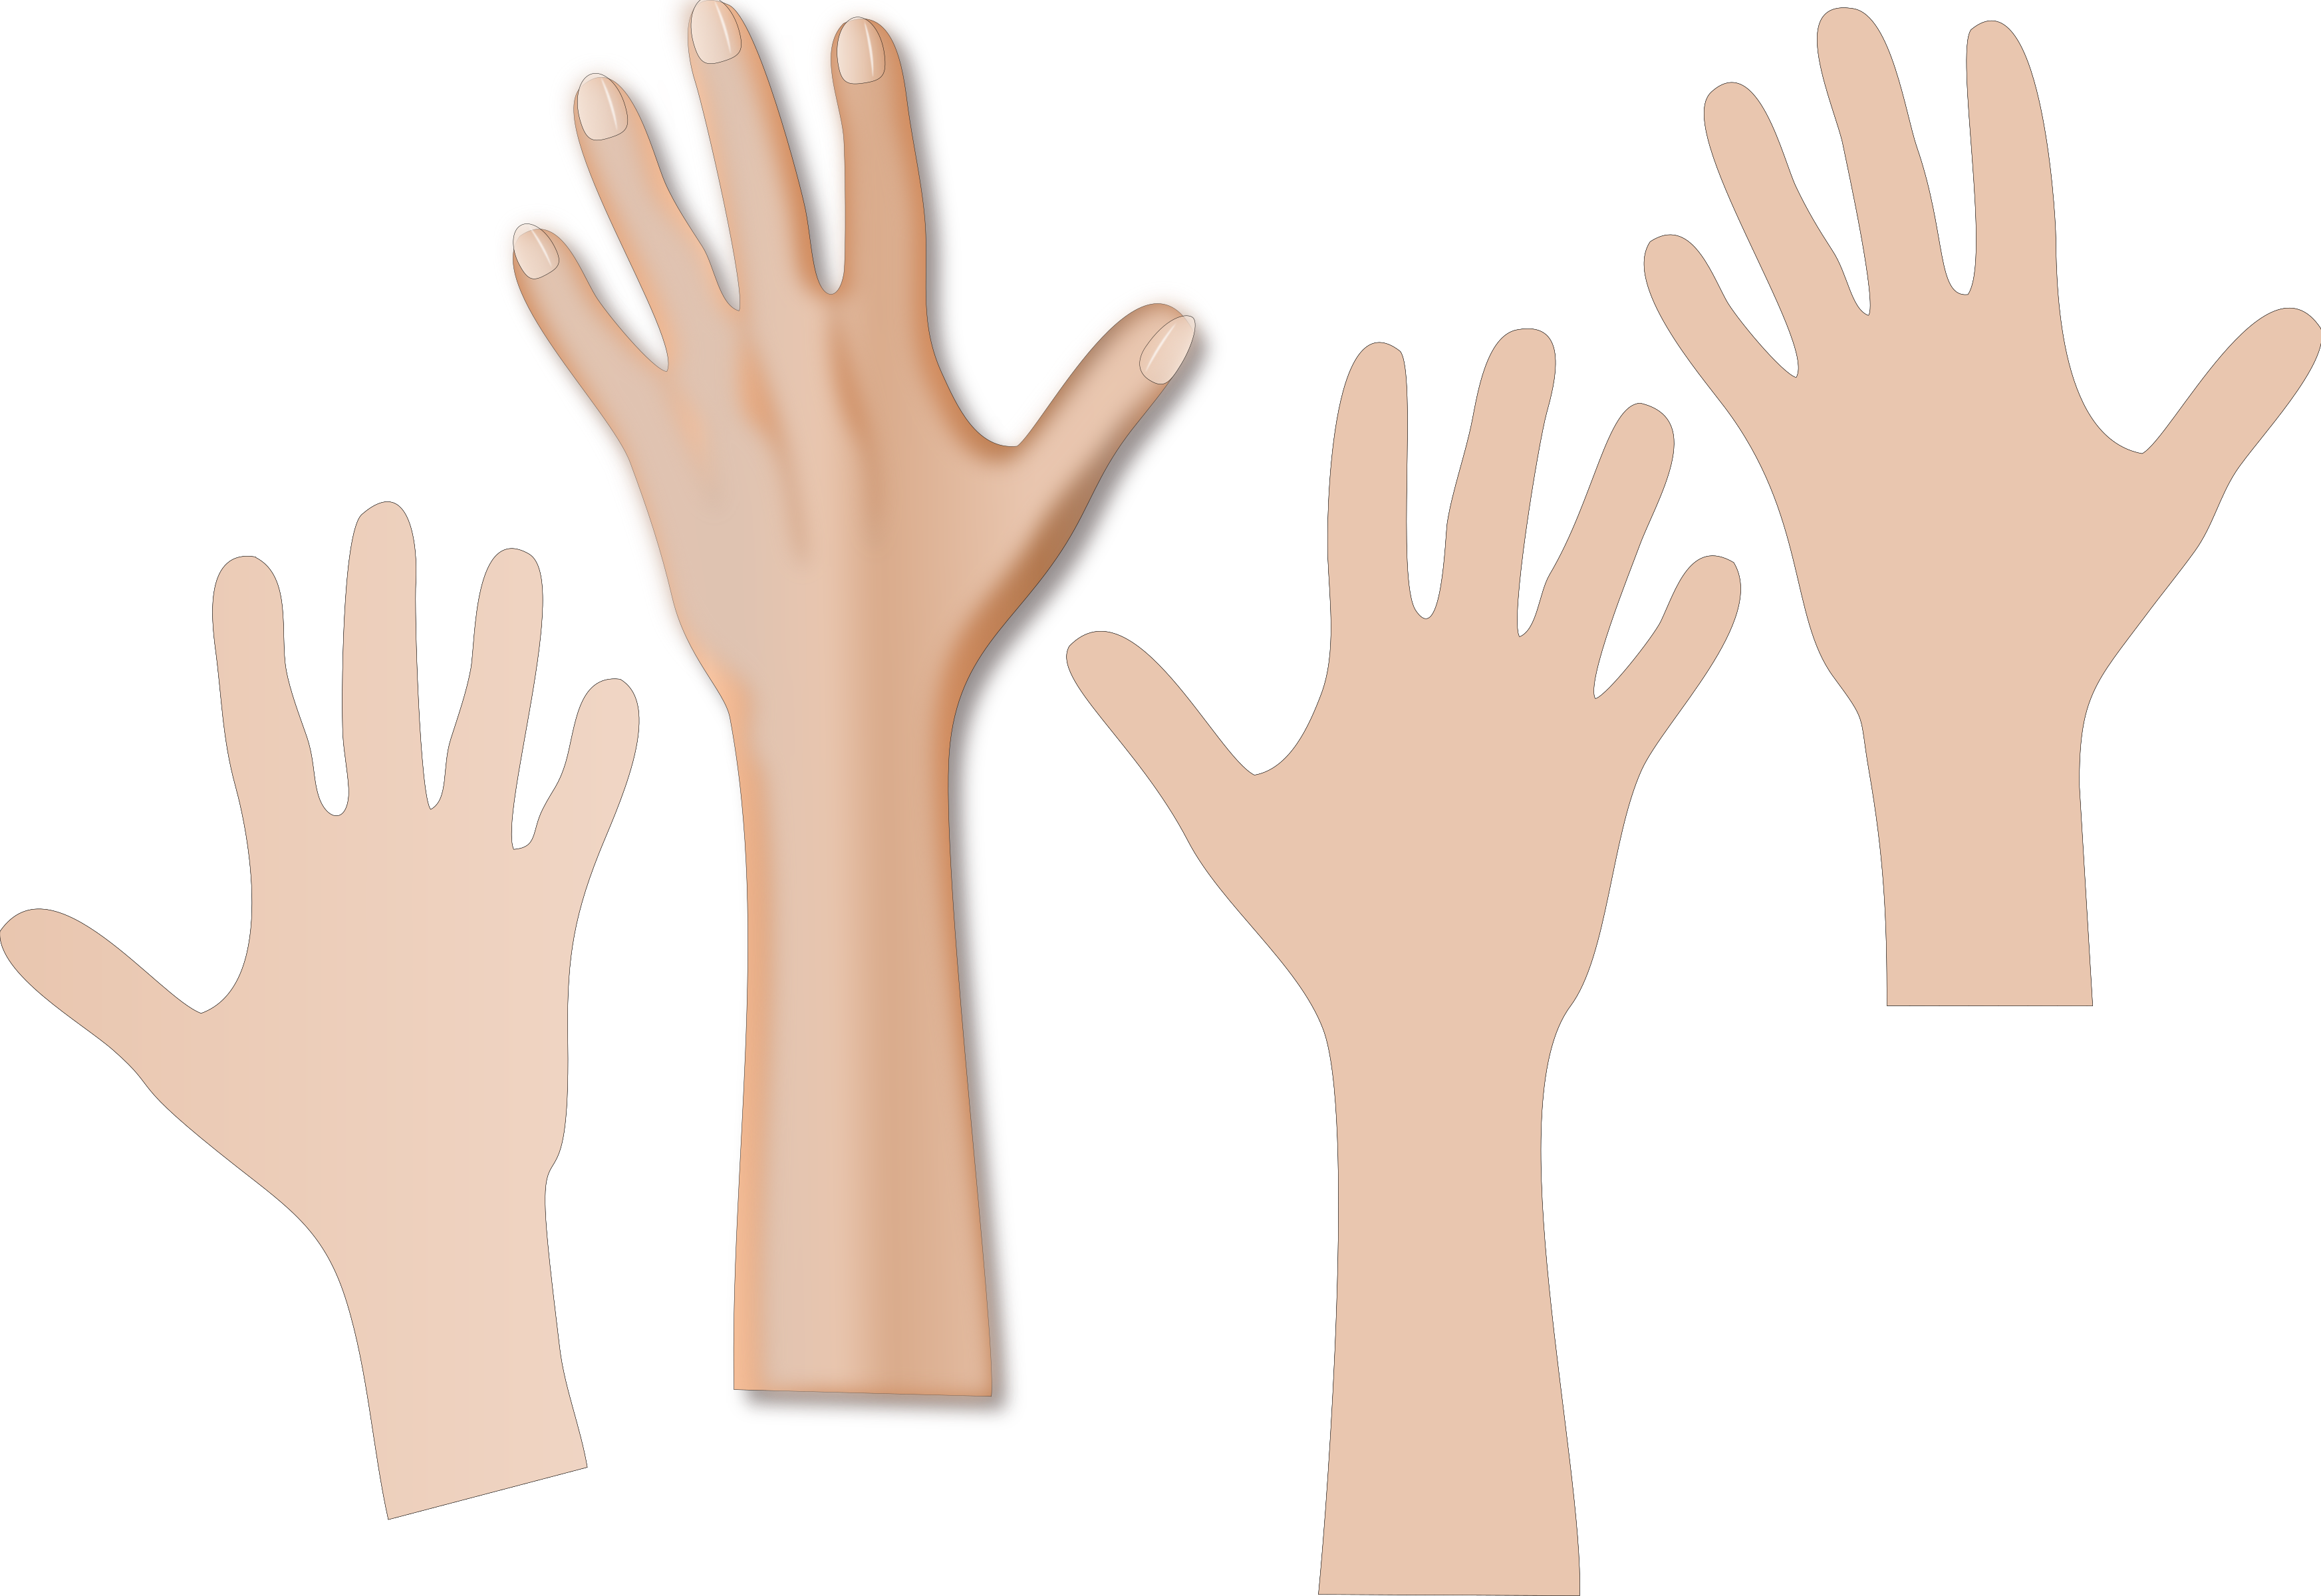  collection of skin. Hand clipart arm